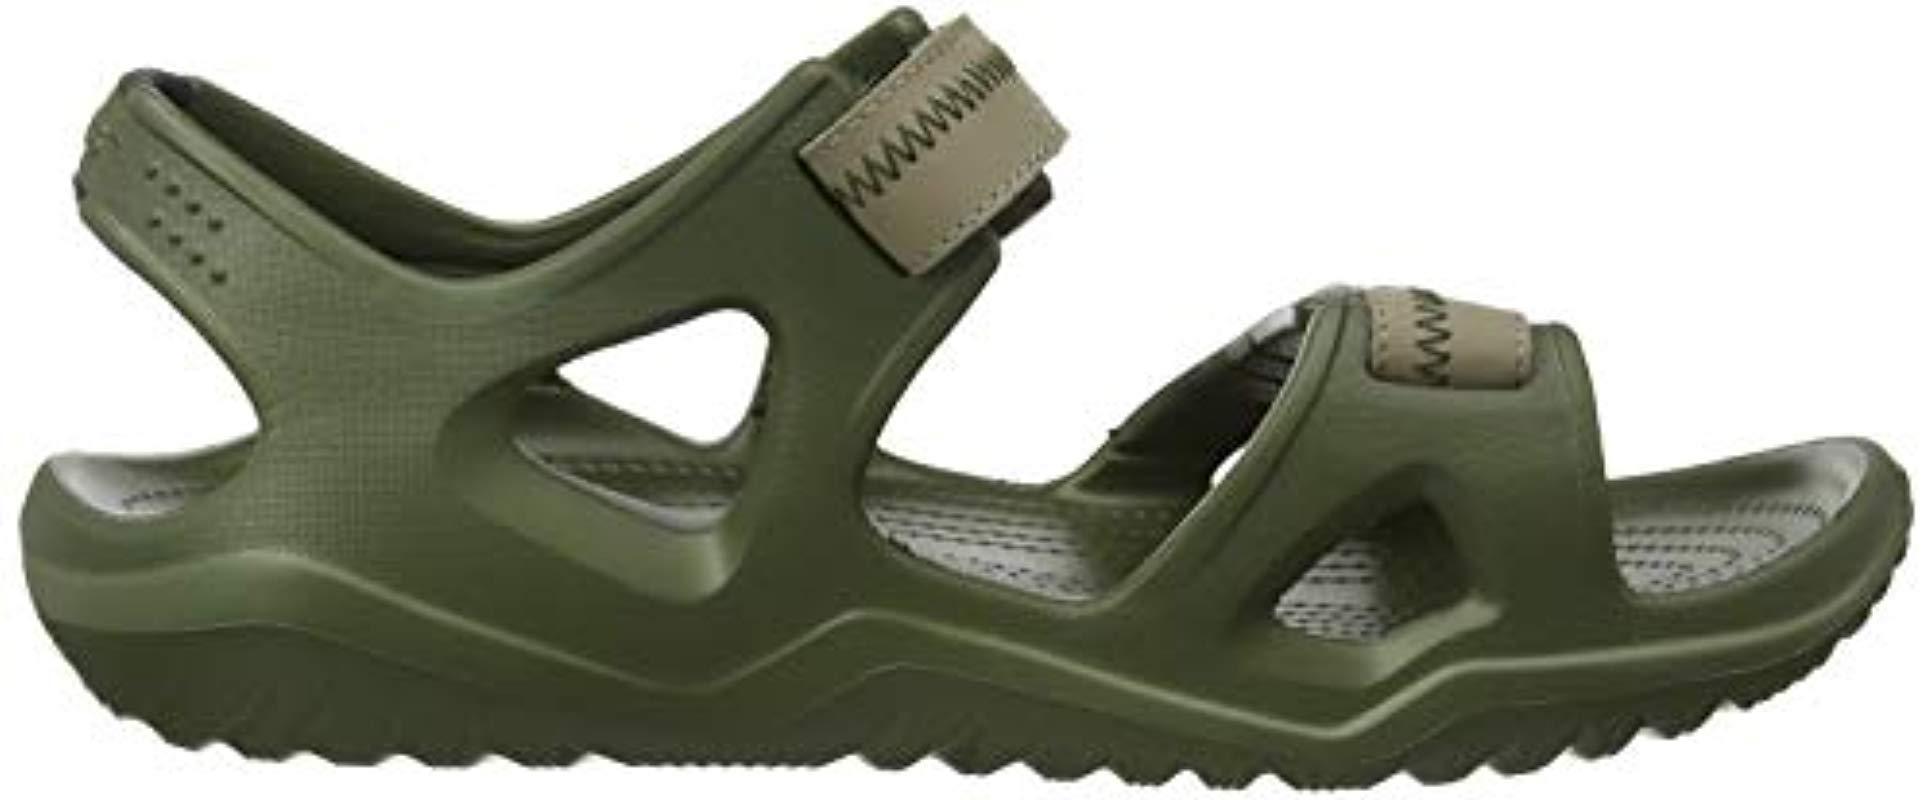 Crocs™ Swiftwater River Sandal in Army Green/Khaki (Green) for Men | Lyst